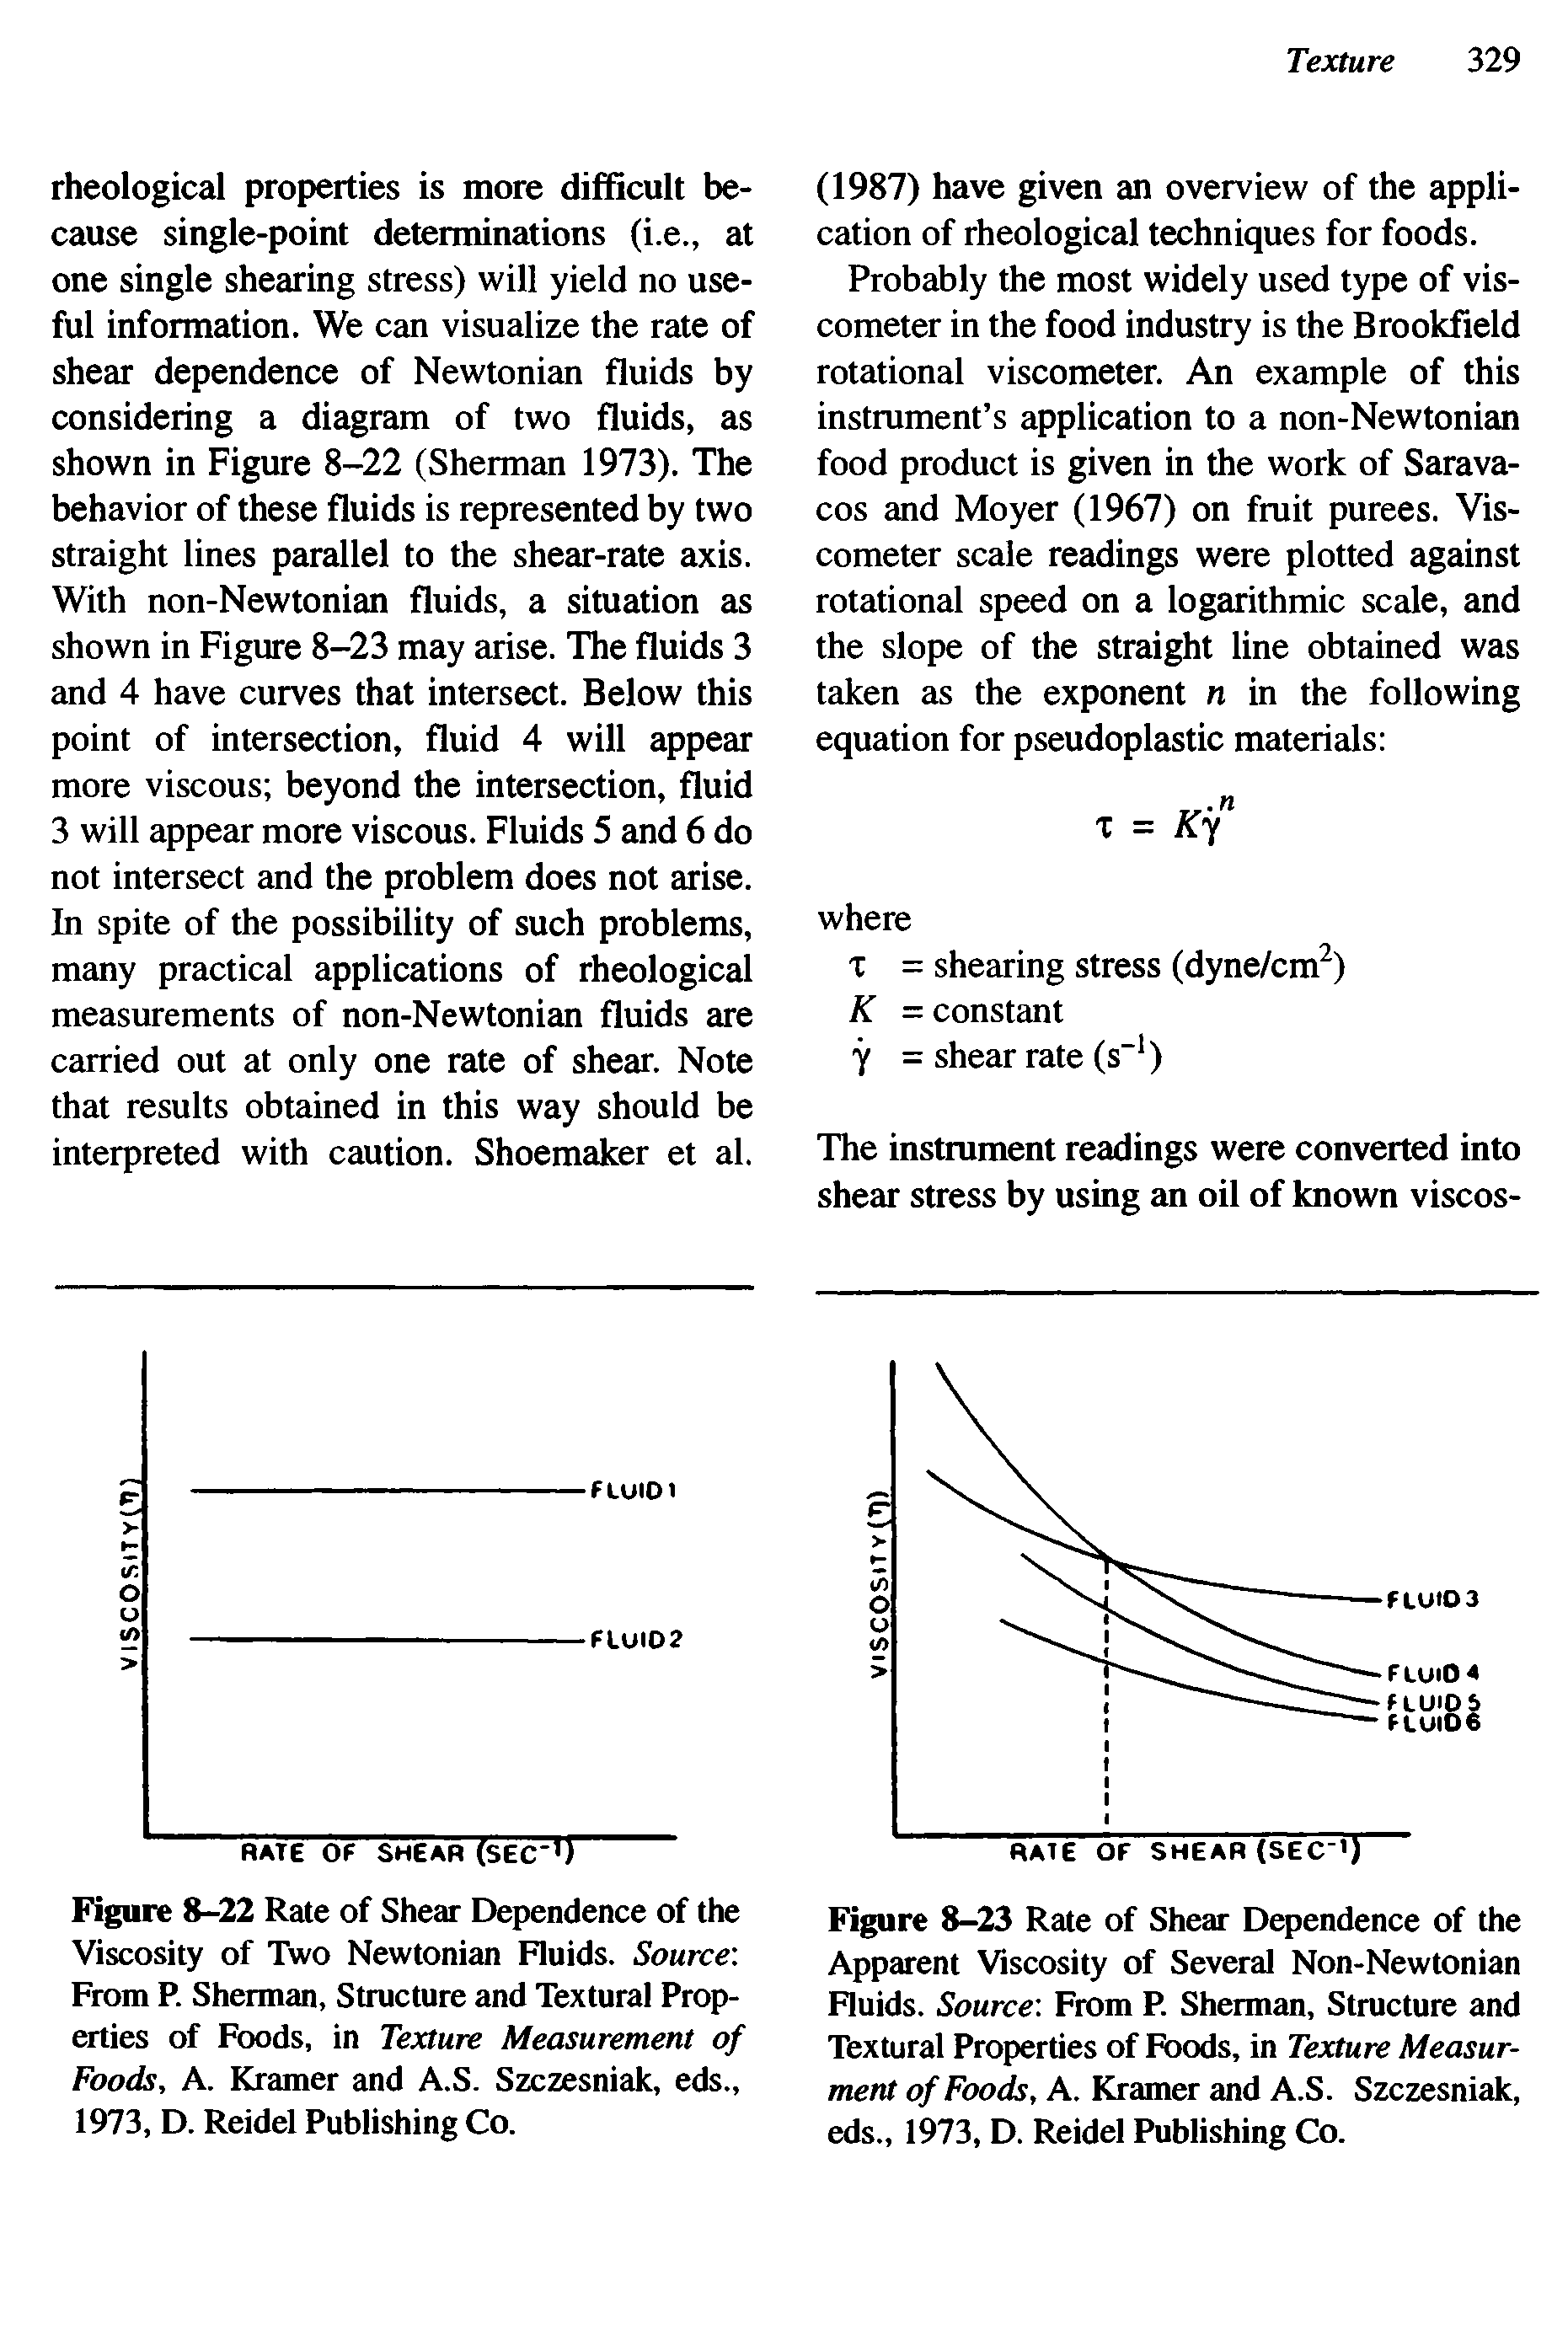 Figure 8-22 Rate of Shear Dependence of the Viscosity of Two Newtonian Fluids. Source From R Sherman, Structure and Textural Properties of Foods, in Texture Measurement of Foods, A. Kramer and A.S. Szczesniak, eds., 1973, D. Reidel Publishing Co.